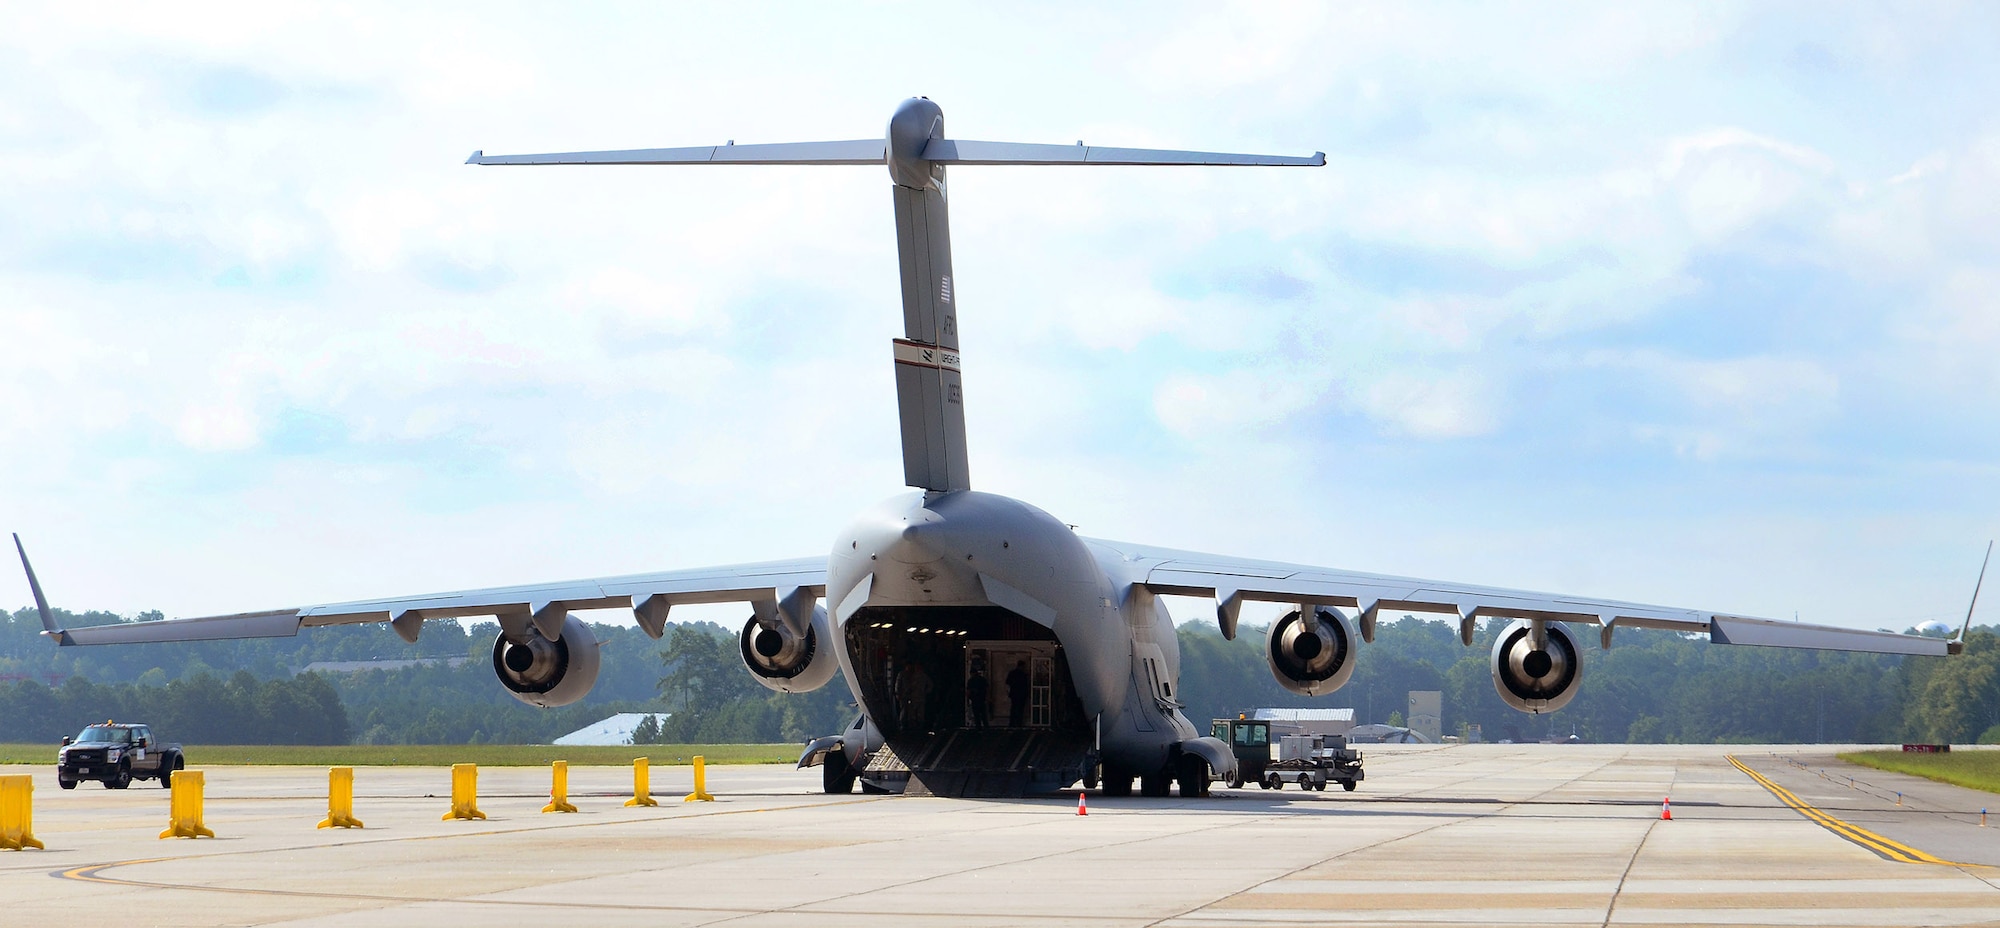 The second Containerized Biocontainment Systems unit was loaded into a U.S. Air Force C-17 to provide an example of how the unit could be airlifted to anywhere in the world if needed, Dobbins Air Reserve Base, Ga., Aug. 11, 2015. The two Containerized Biocontainment units built by MRIGlobal through a partnership with the U.S. State Dept. and the Paul G. Allen Ebola Program, will be positioned at Dobbins ARB, ready for future. (U.S. Air Force photo/ Brad Fallin)